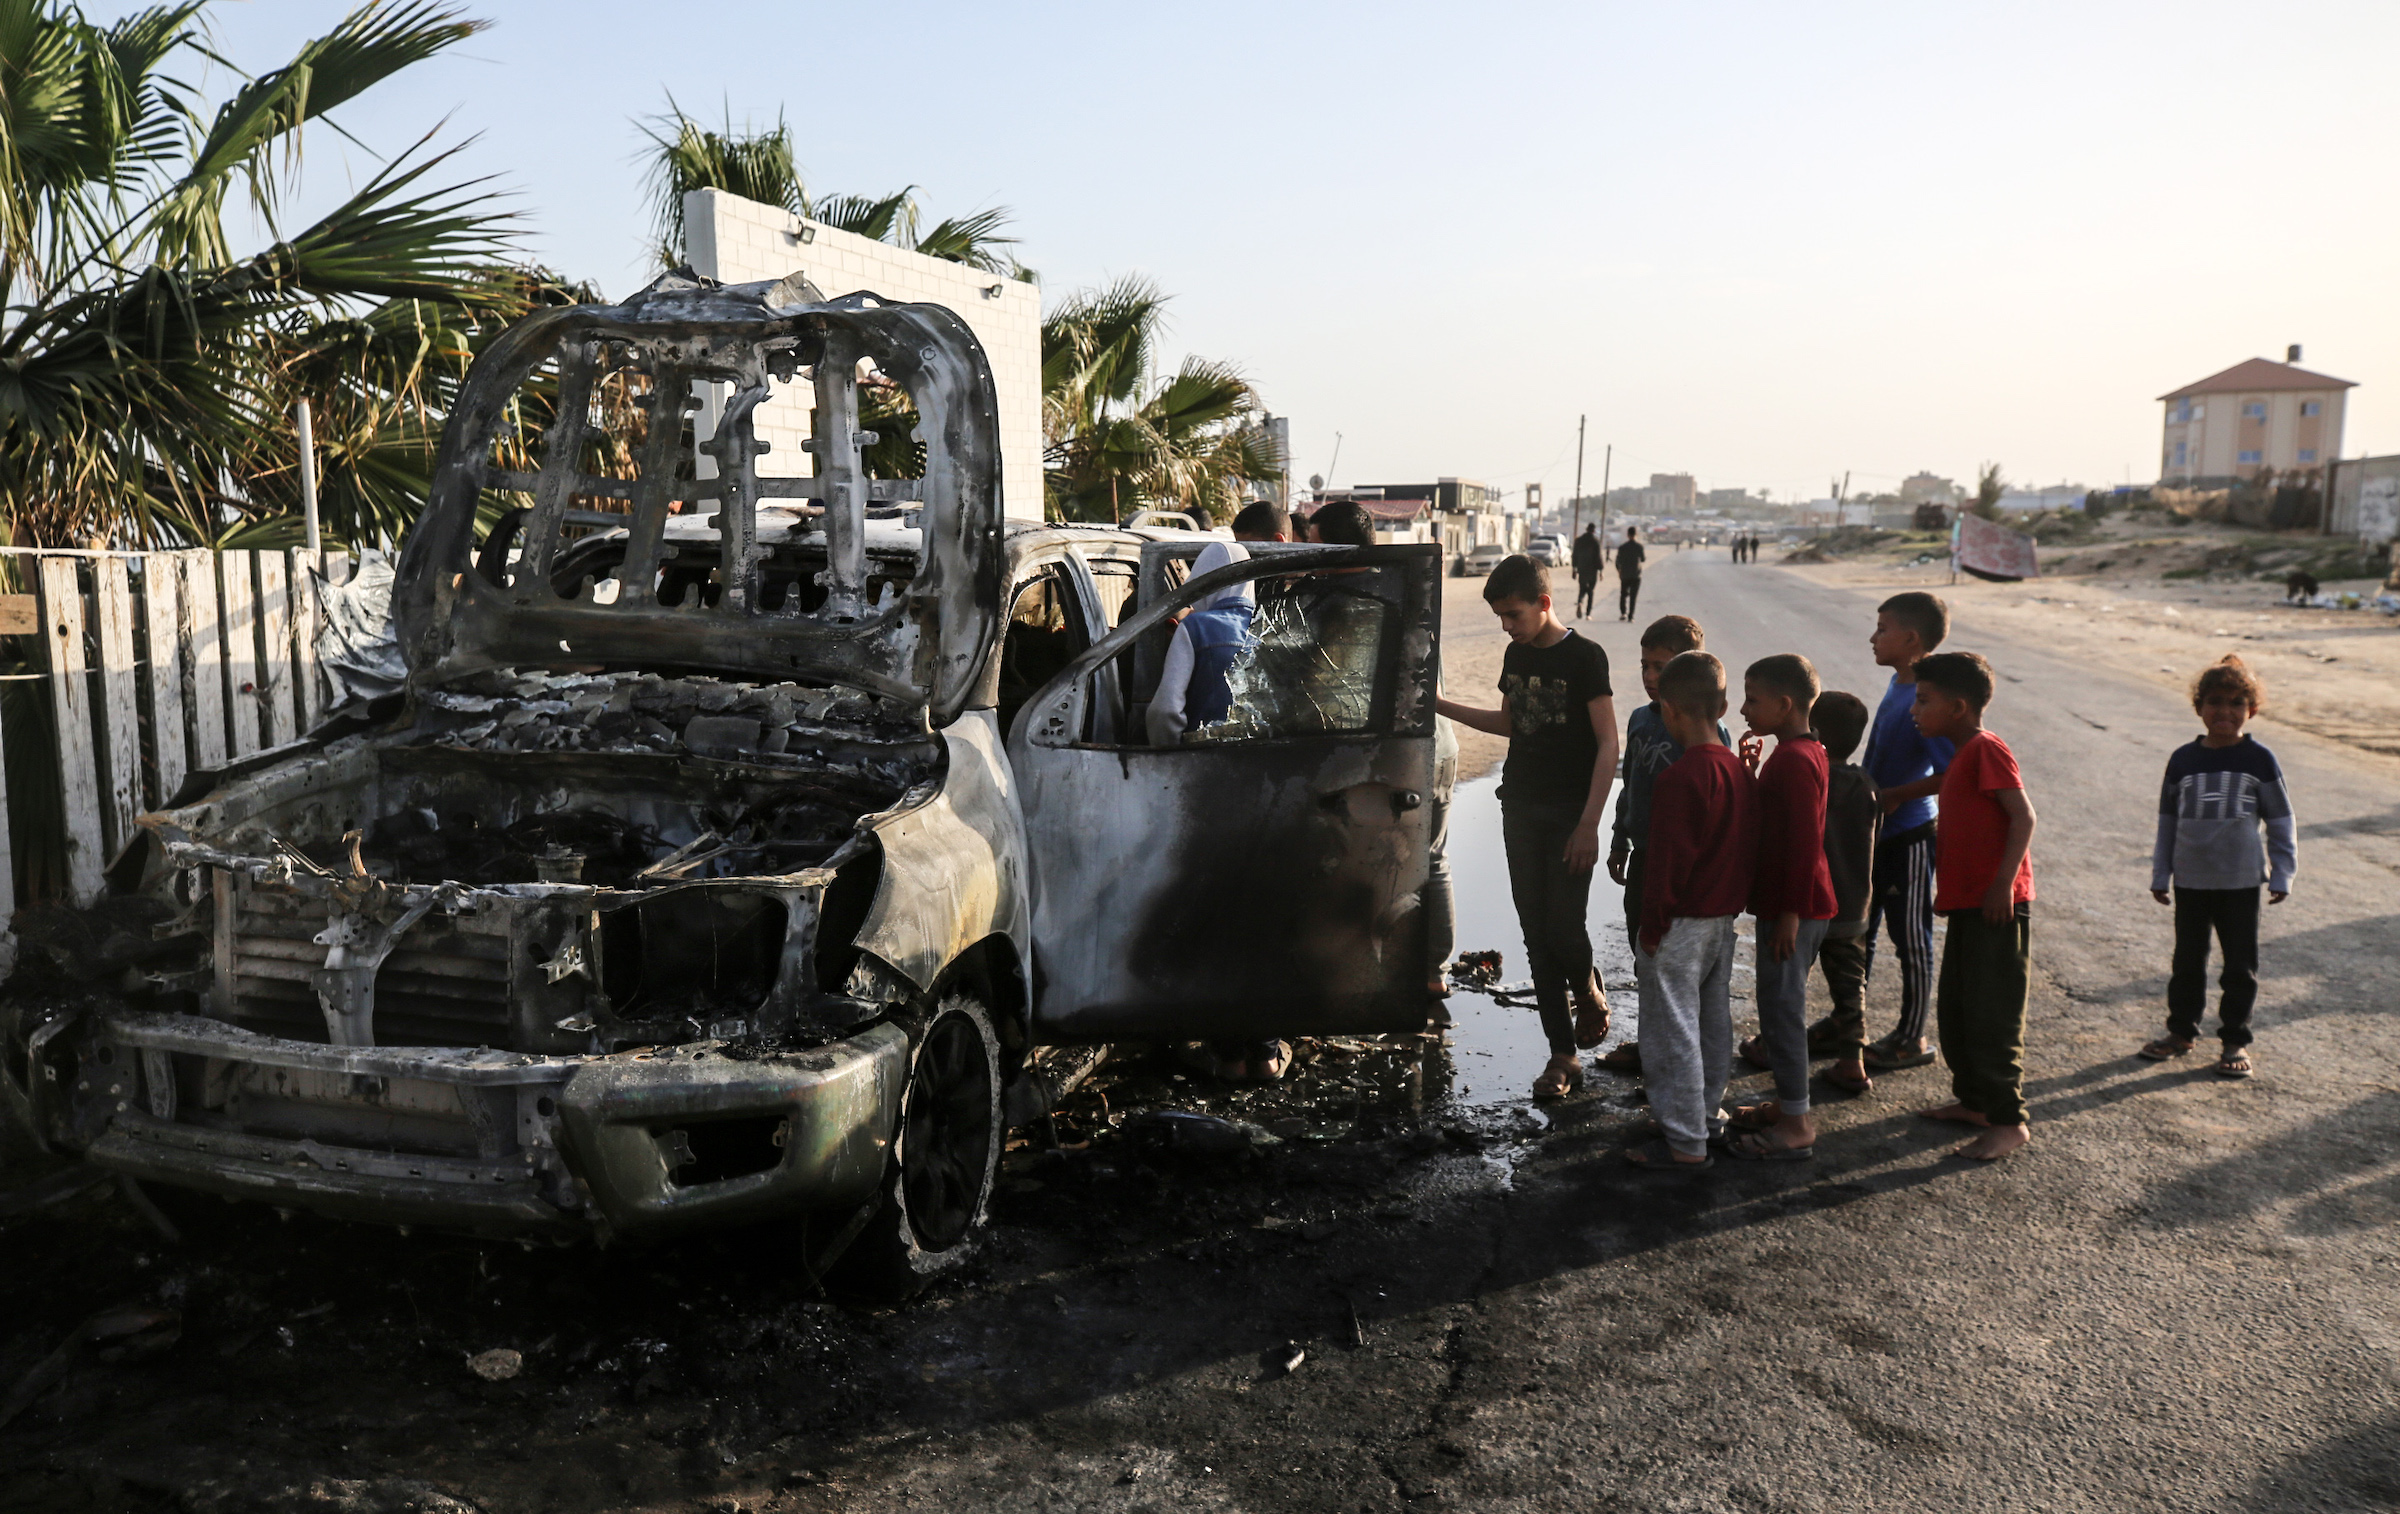 Palestinian children are standing next to a bombed-out WCK vehicle in Deir Al-Balah, in the central Gaza Strip.